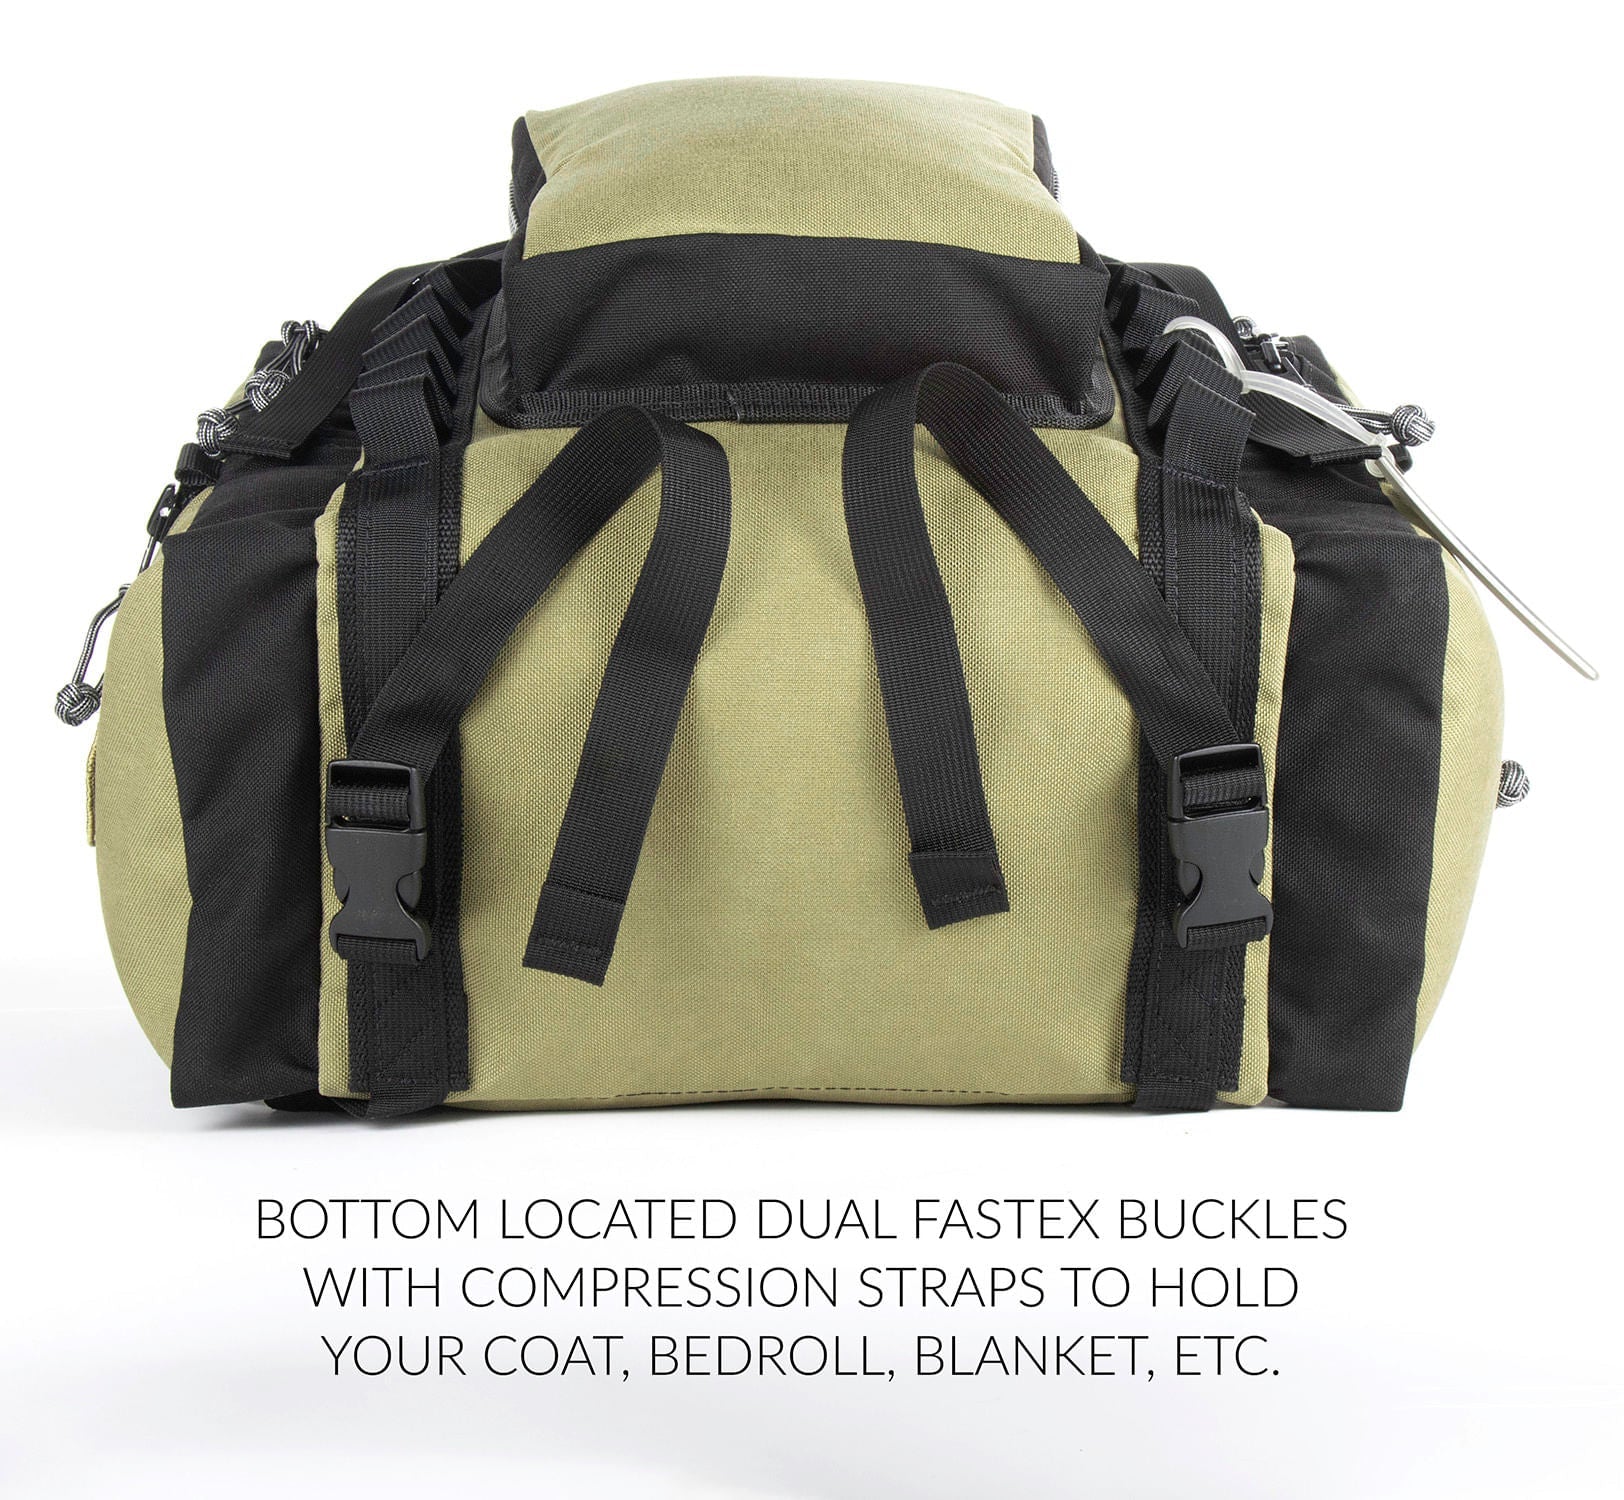 Bottom located dual Fastex buckles with compression straps to hold your coat, bedroll, blanket, ETC. 